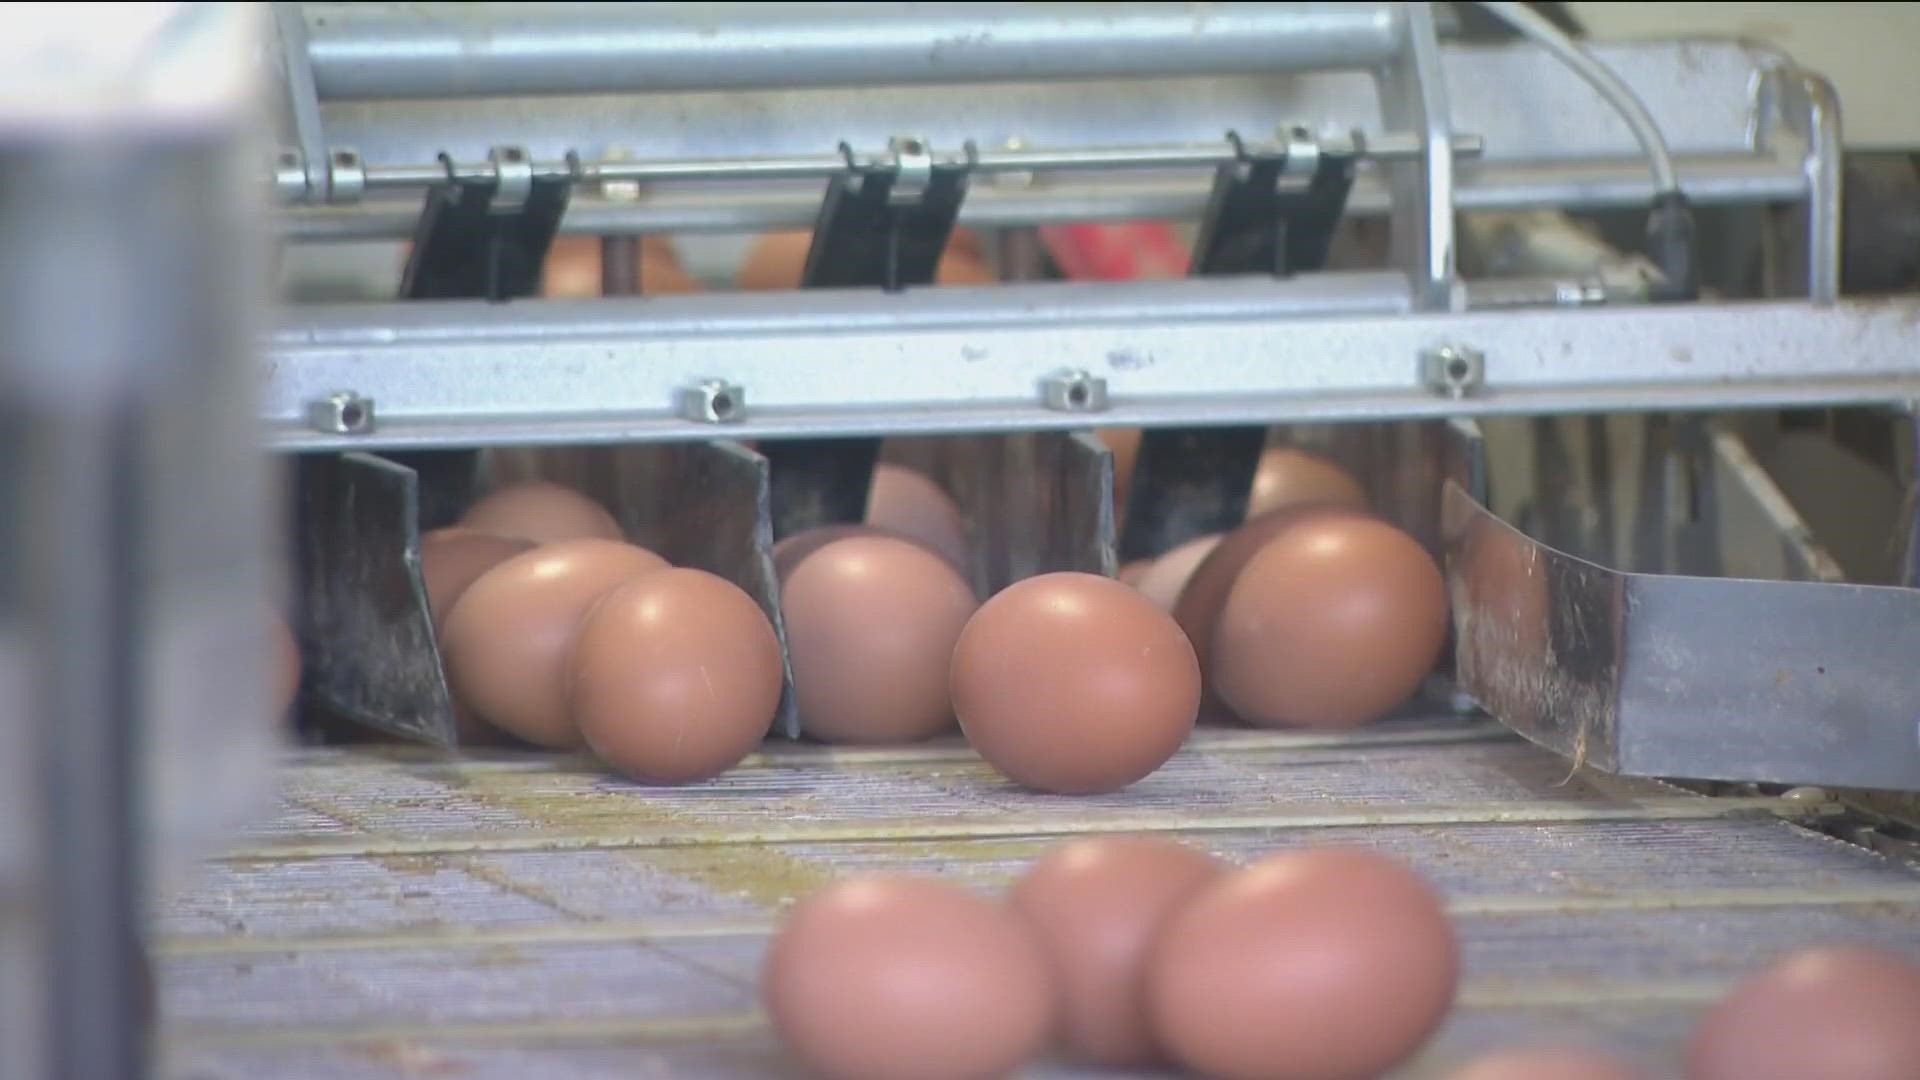 People are taking advantage of egg prices in Tijuana, but the director of field operations for CBP has alerted the public about the possible of fines.